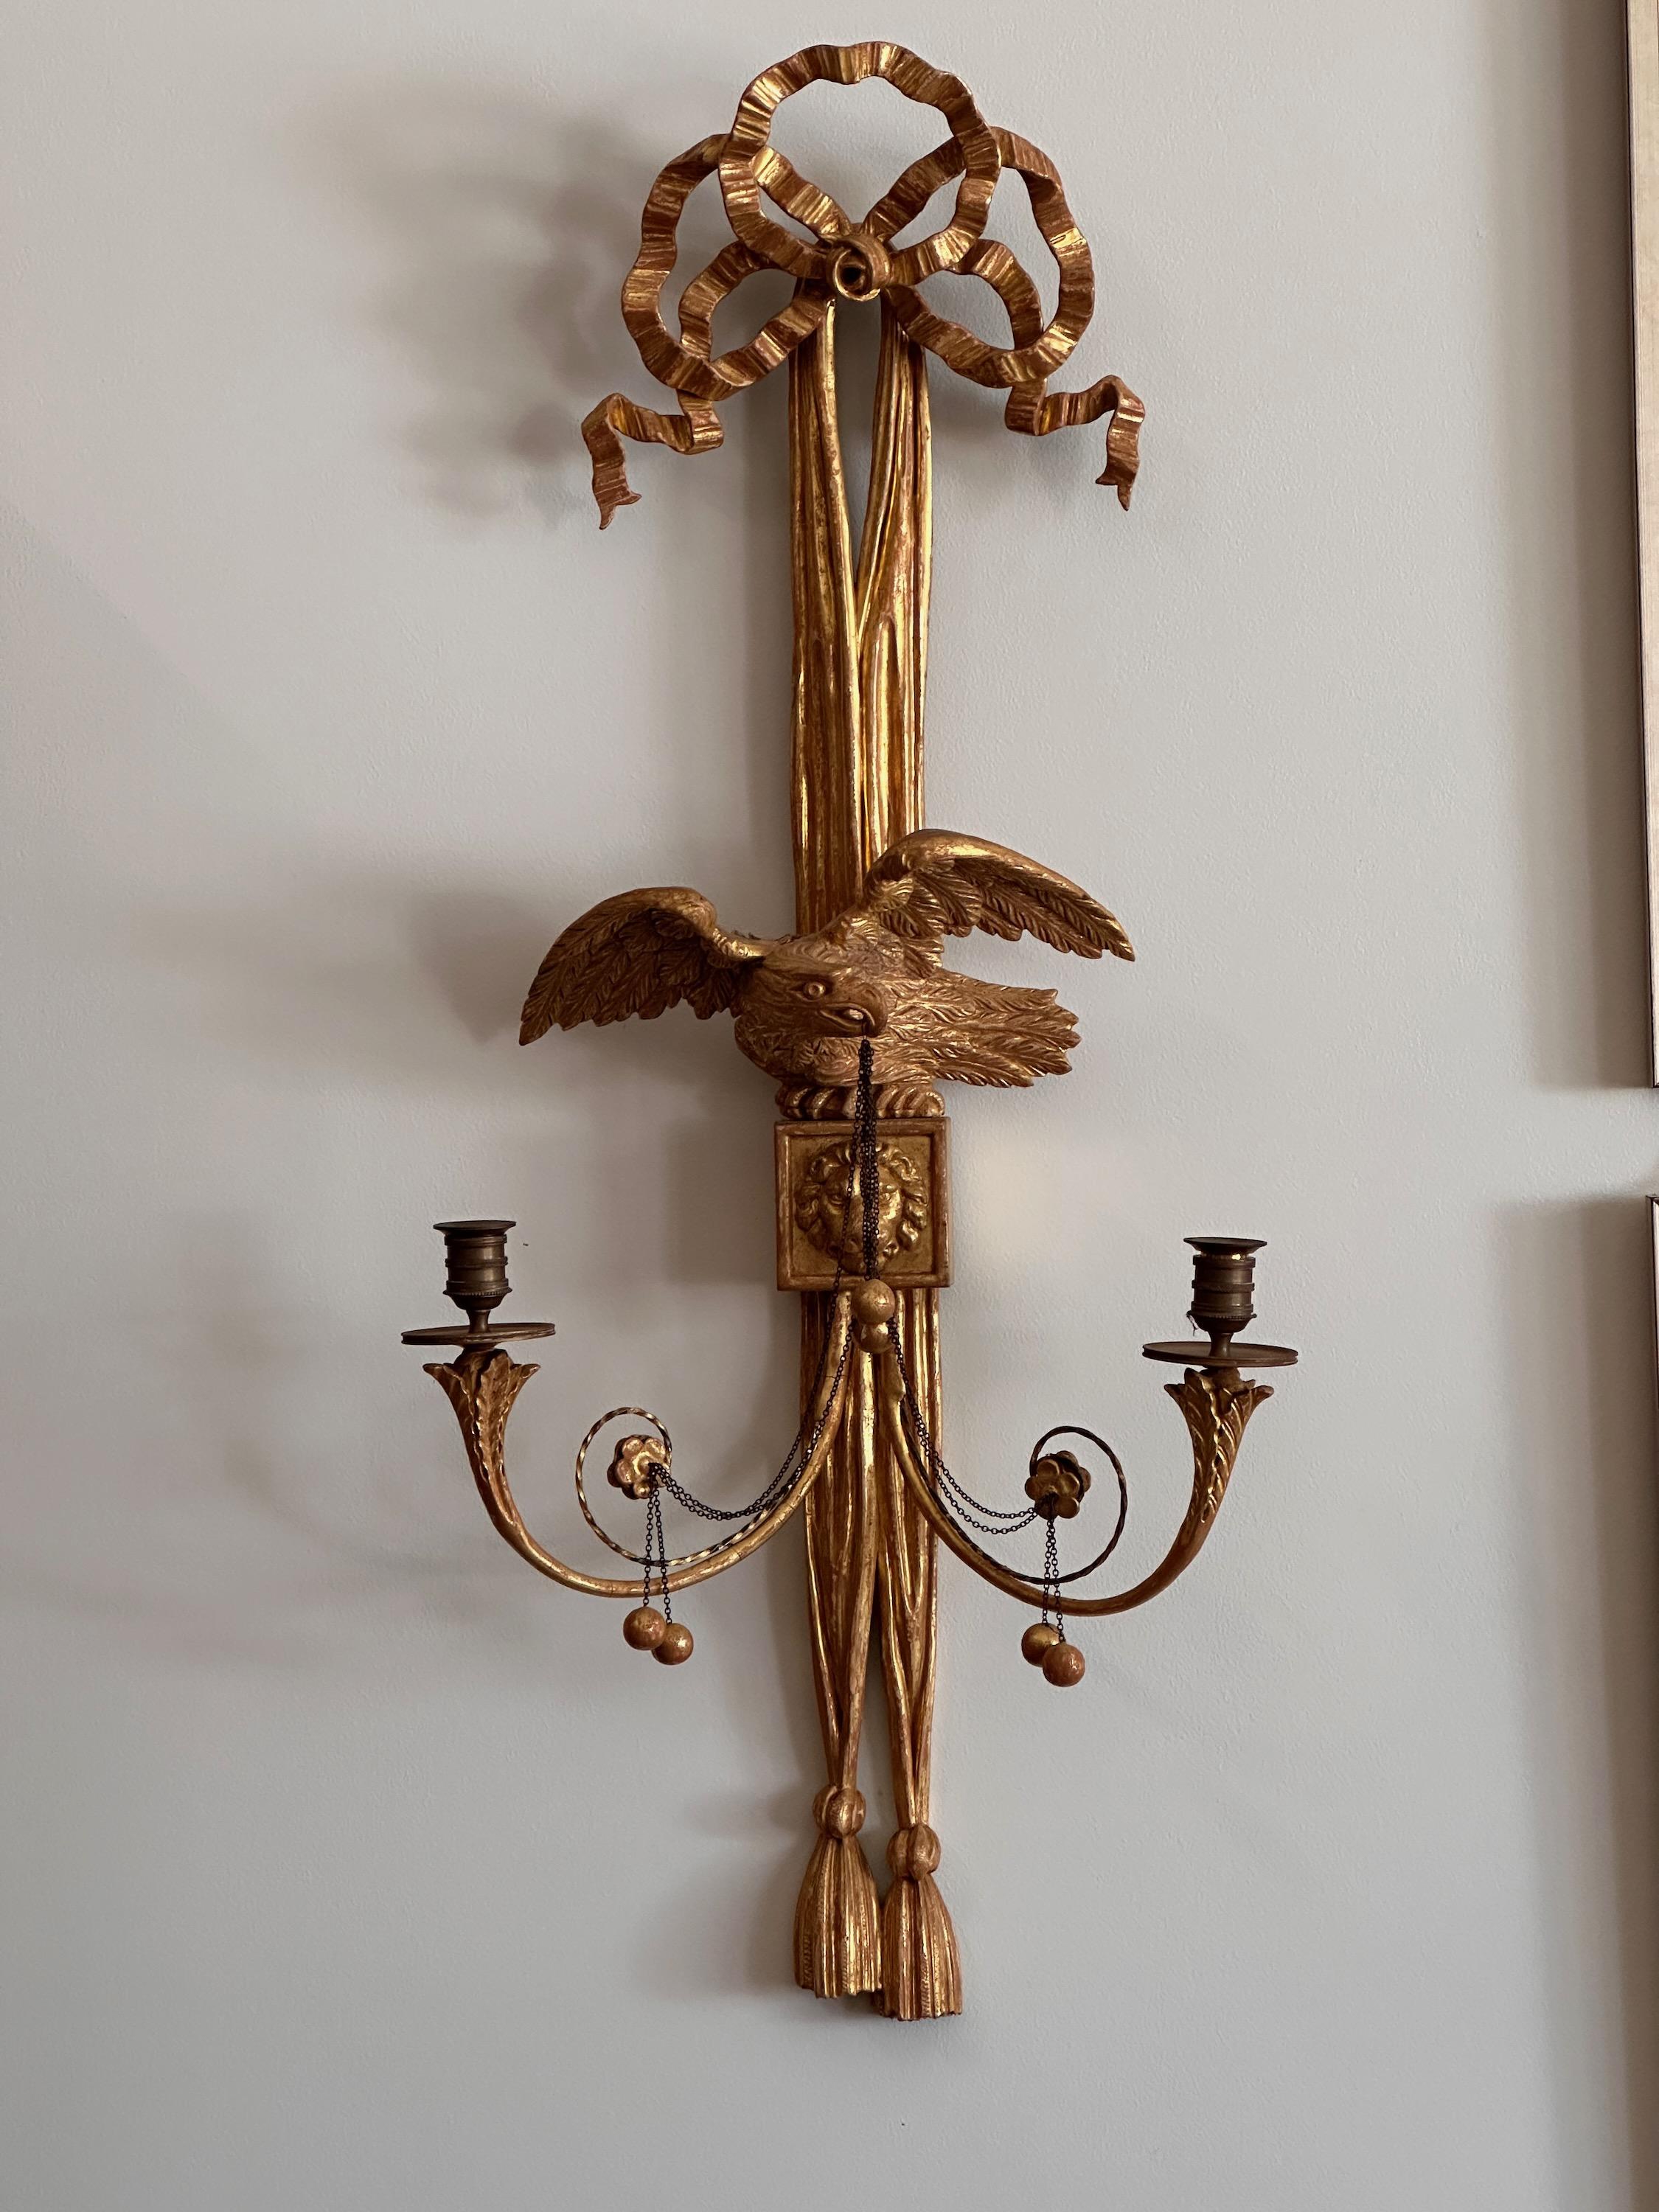 An exceptionally large pair of early 19th century English Regency carved giltwood sconces with eagles in mirror image perched on carved ribbon swags and lion's head medallions each with two candle holders.